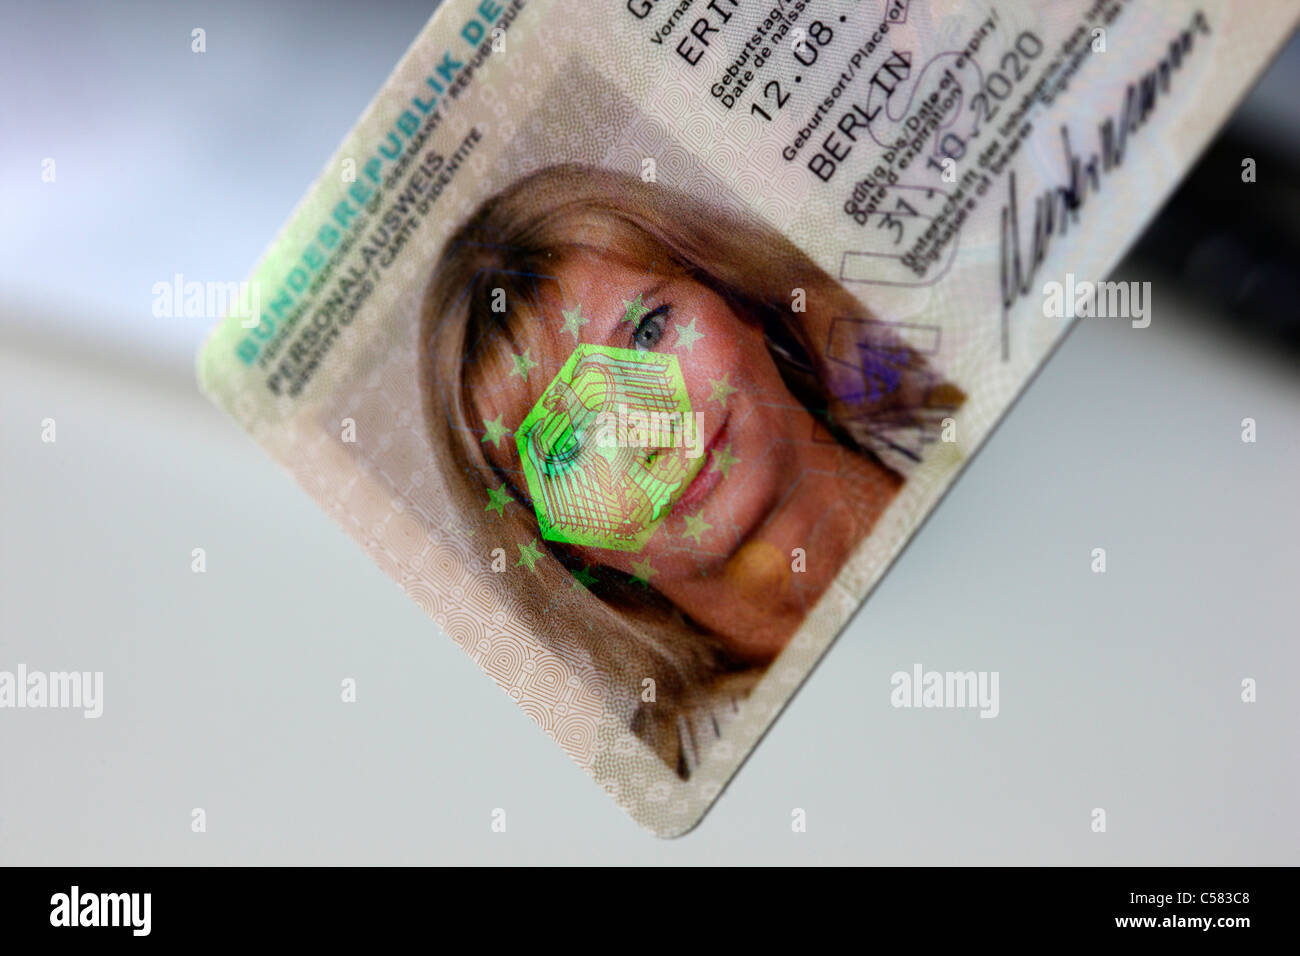 New German Id Card With Holographic Picture And 3 D Security Signatures Stock Photo Alamy